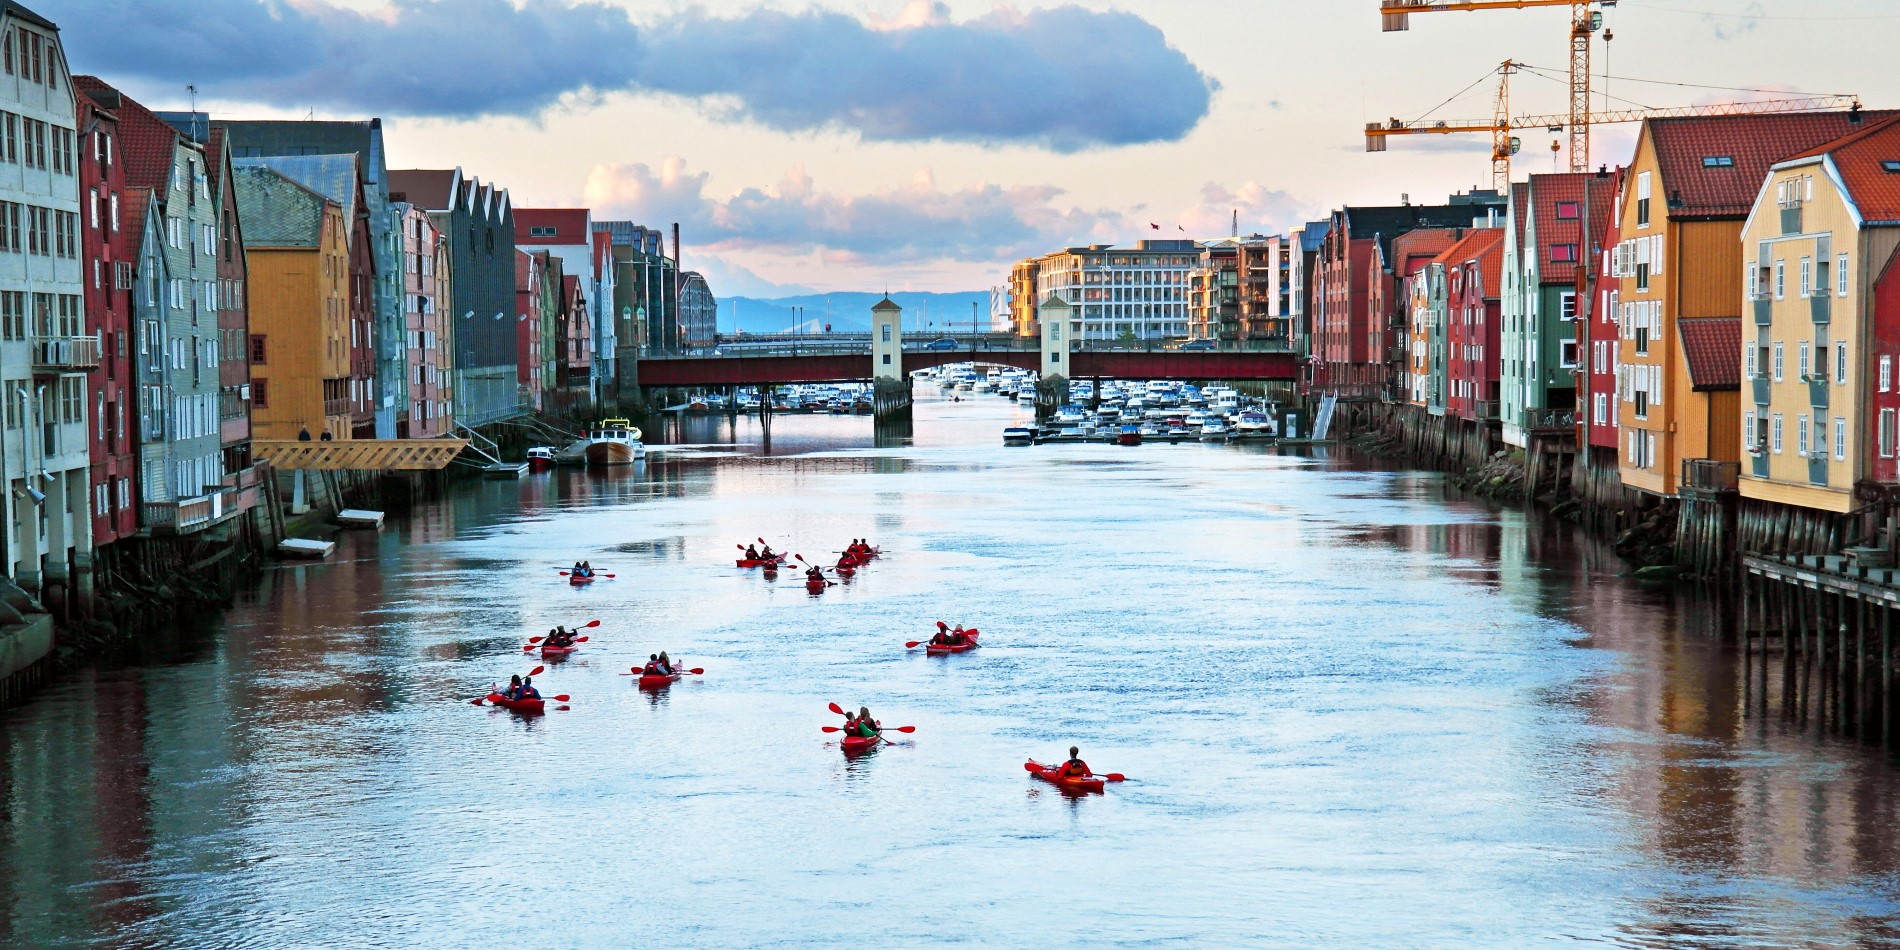 A group of kayaks paddeling on the river Nid, in Trondheim, Norway